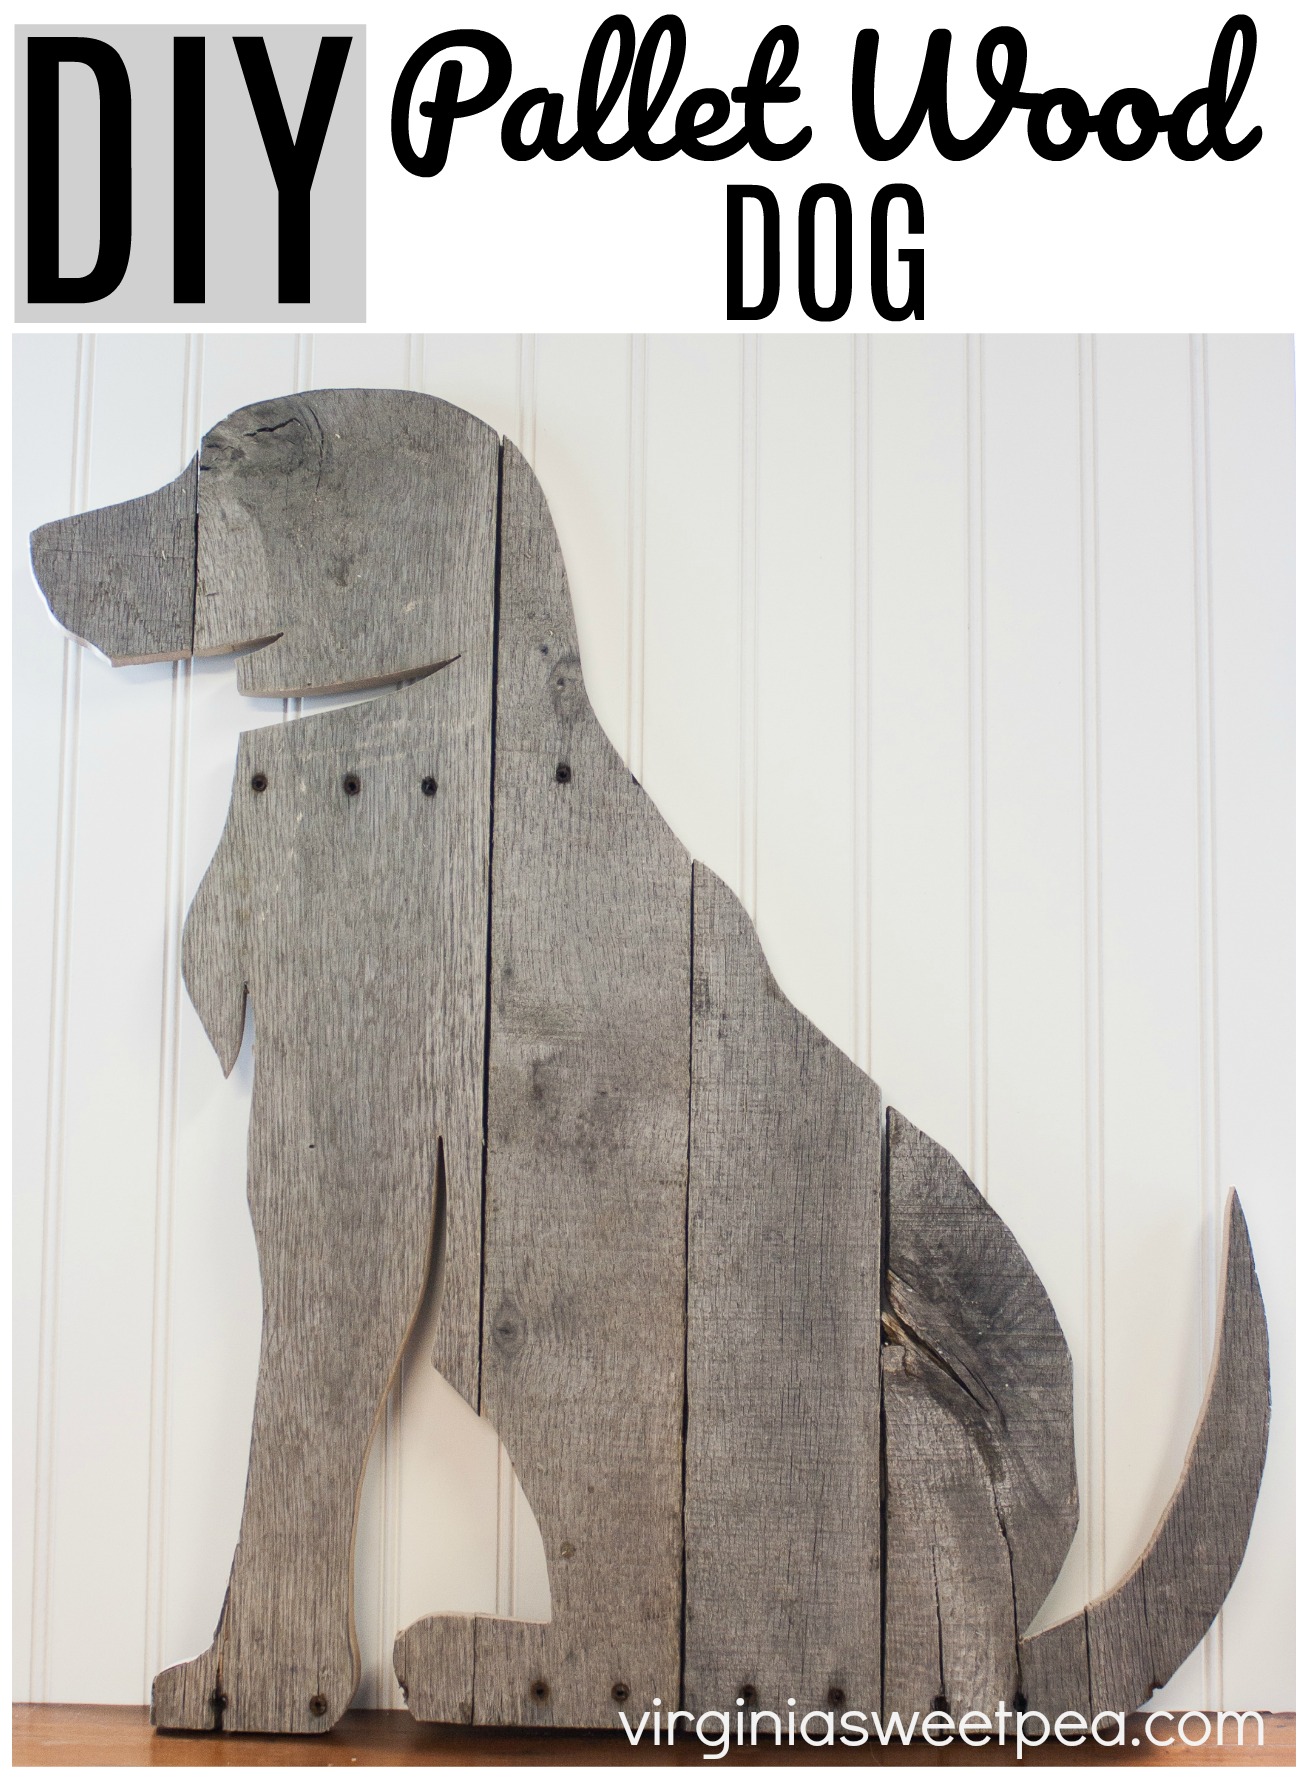 Learn how to make a decorative dog to hang or display using pallet wood.